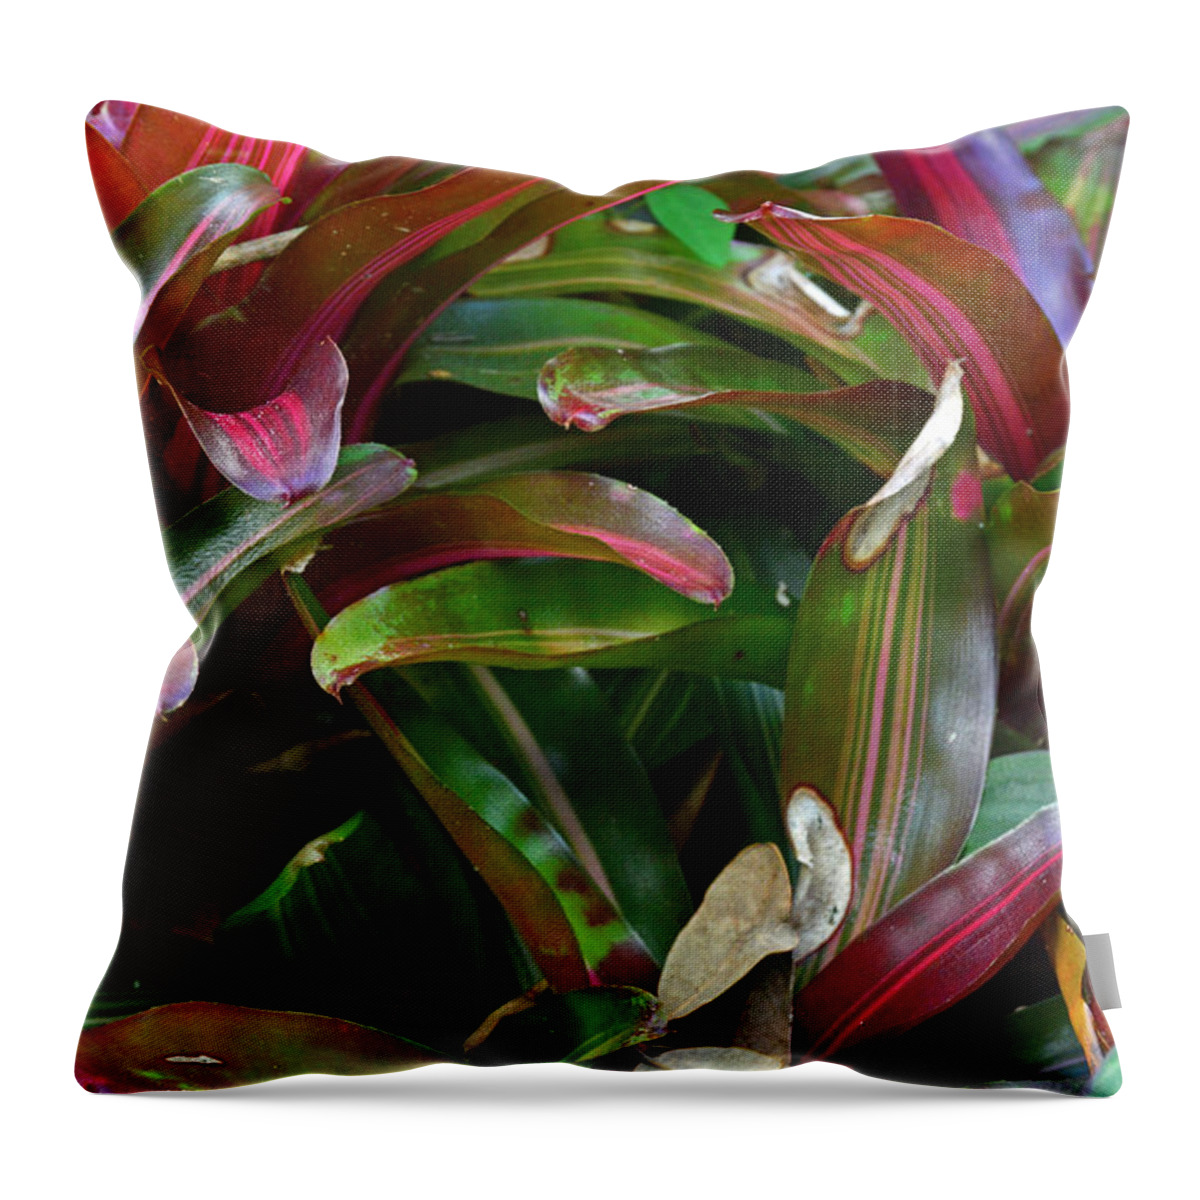 Purple Shield Throw Pillow featuring the photograph Autumn Colors at Albin Polasek Museum by Bruce Gourley